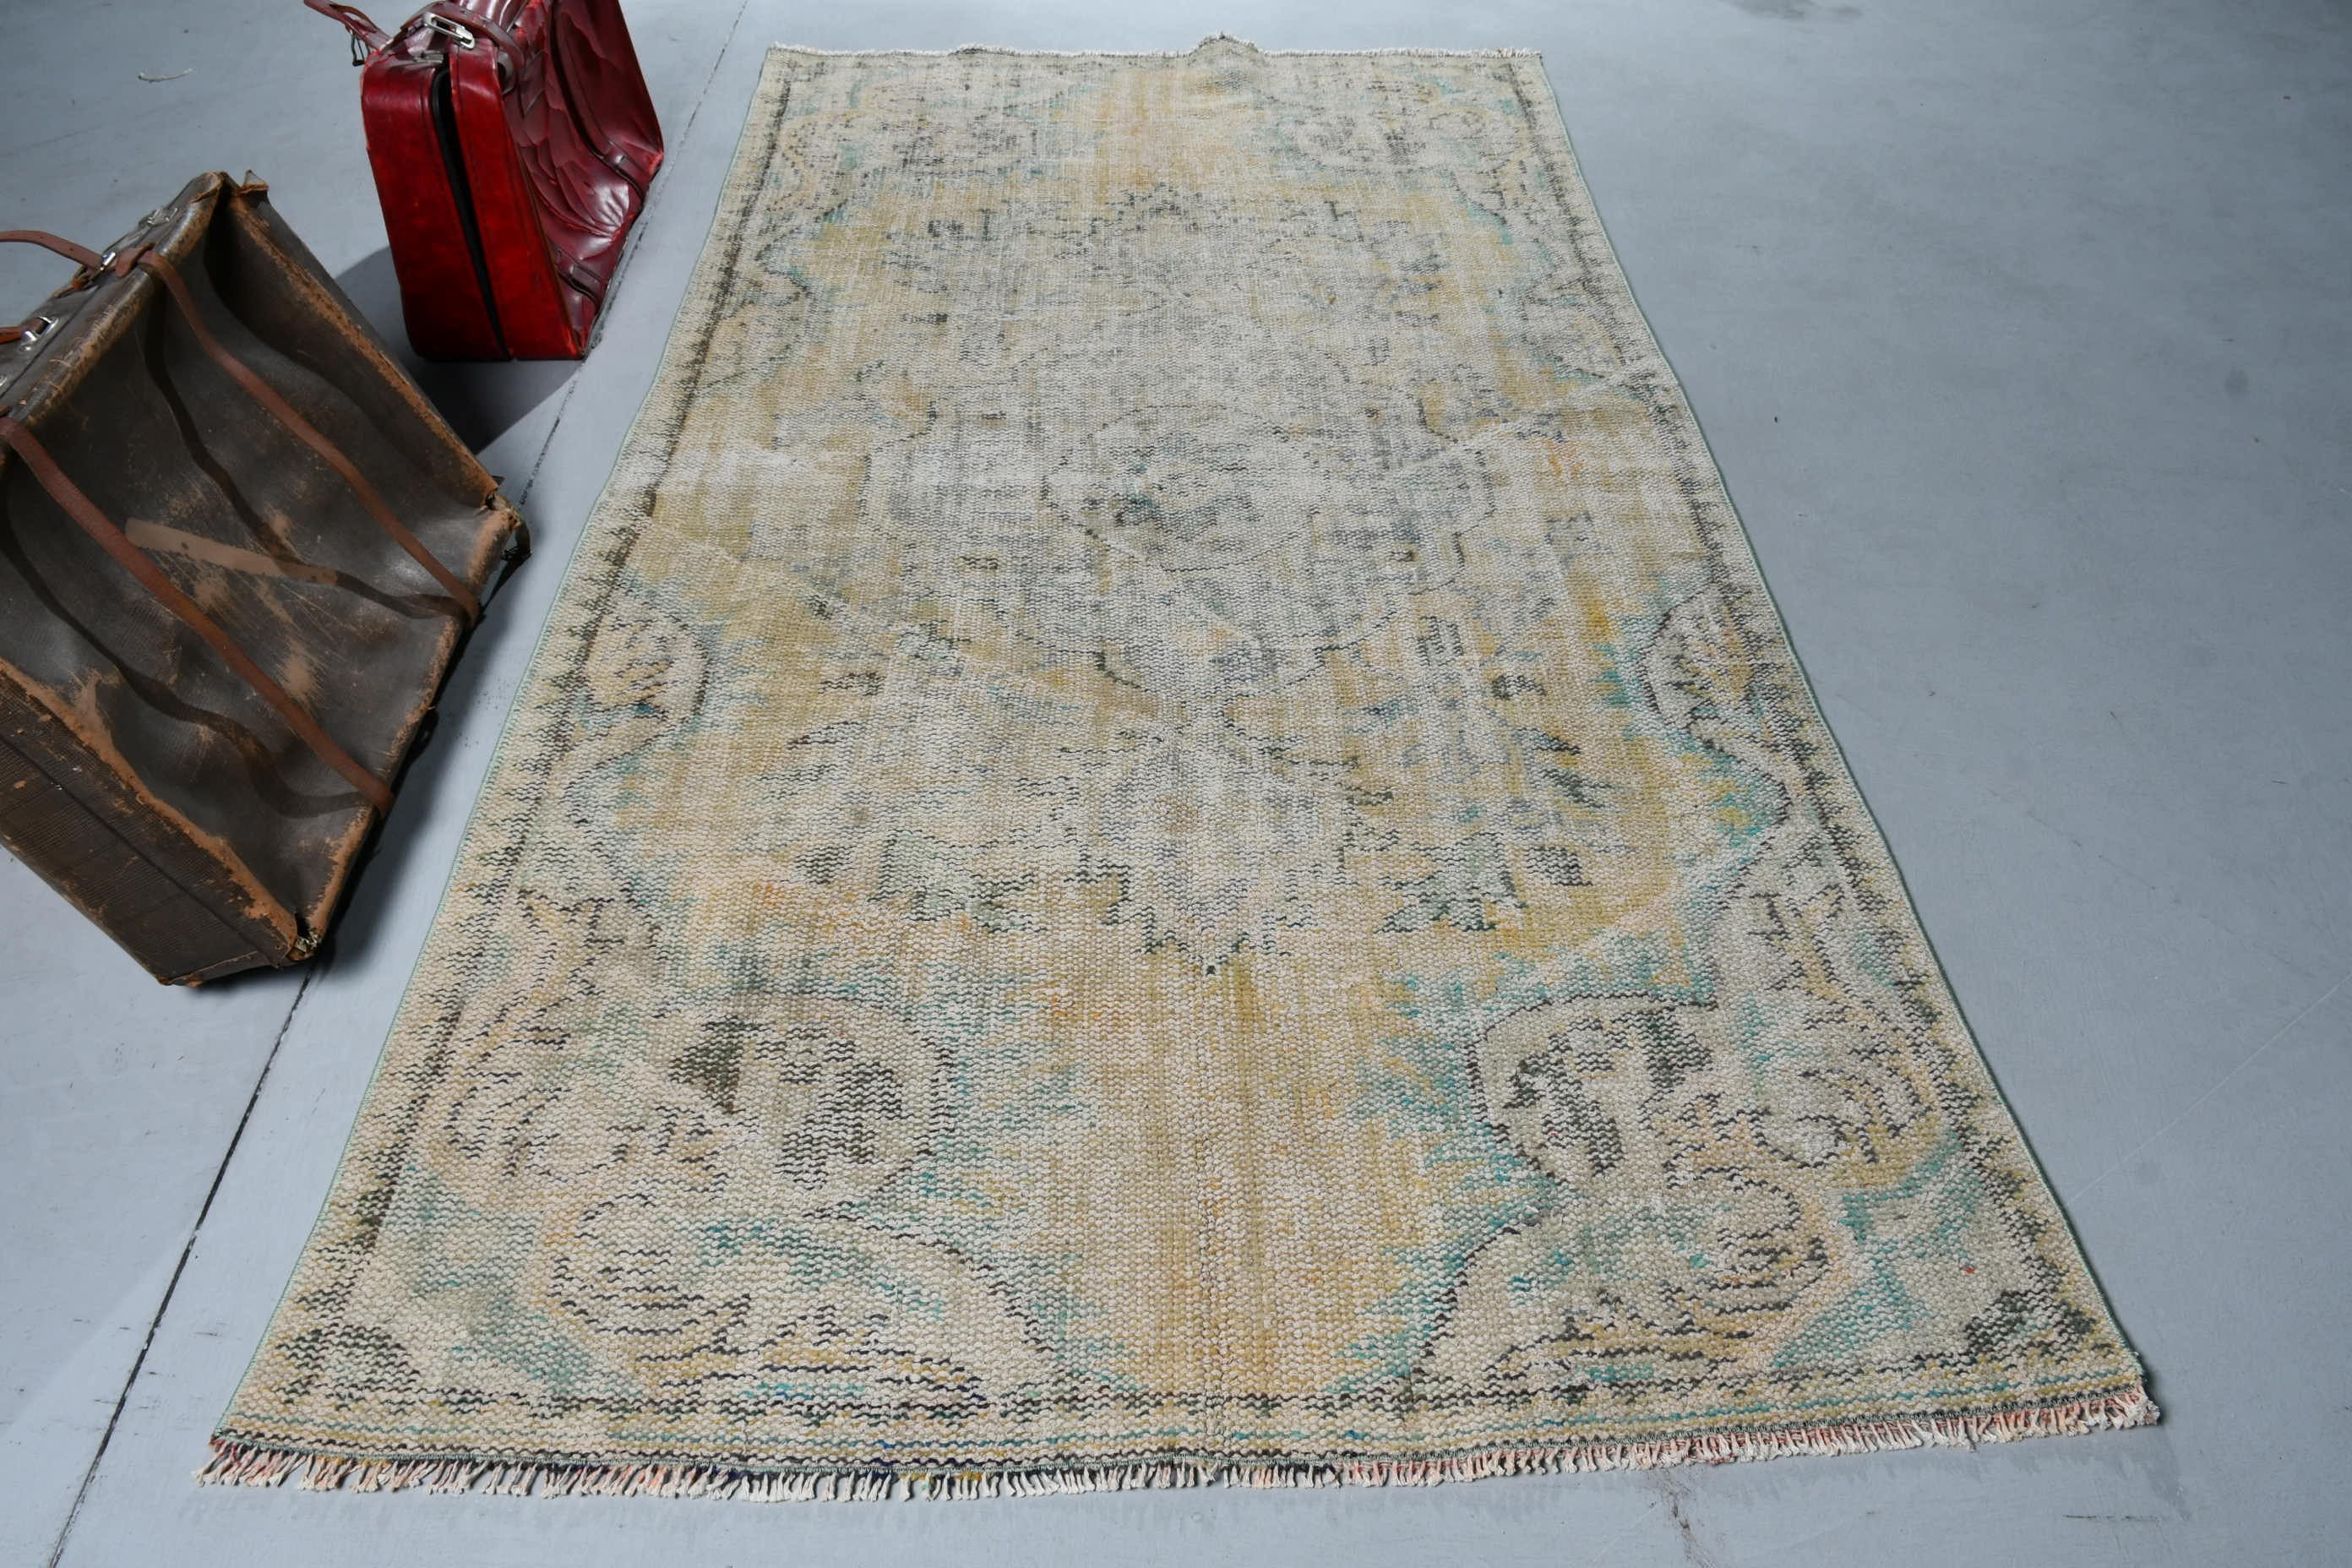 Bedroom Rug, Antique Rug, Dining Room Rugs, Turkish Rugs, Anatolian Rugs, 4.4x8.2 ft Area Rugs, Vintage Rugs, Yellow Home Decor Rug